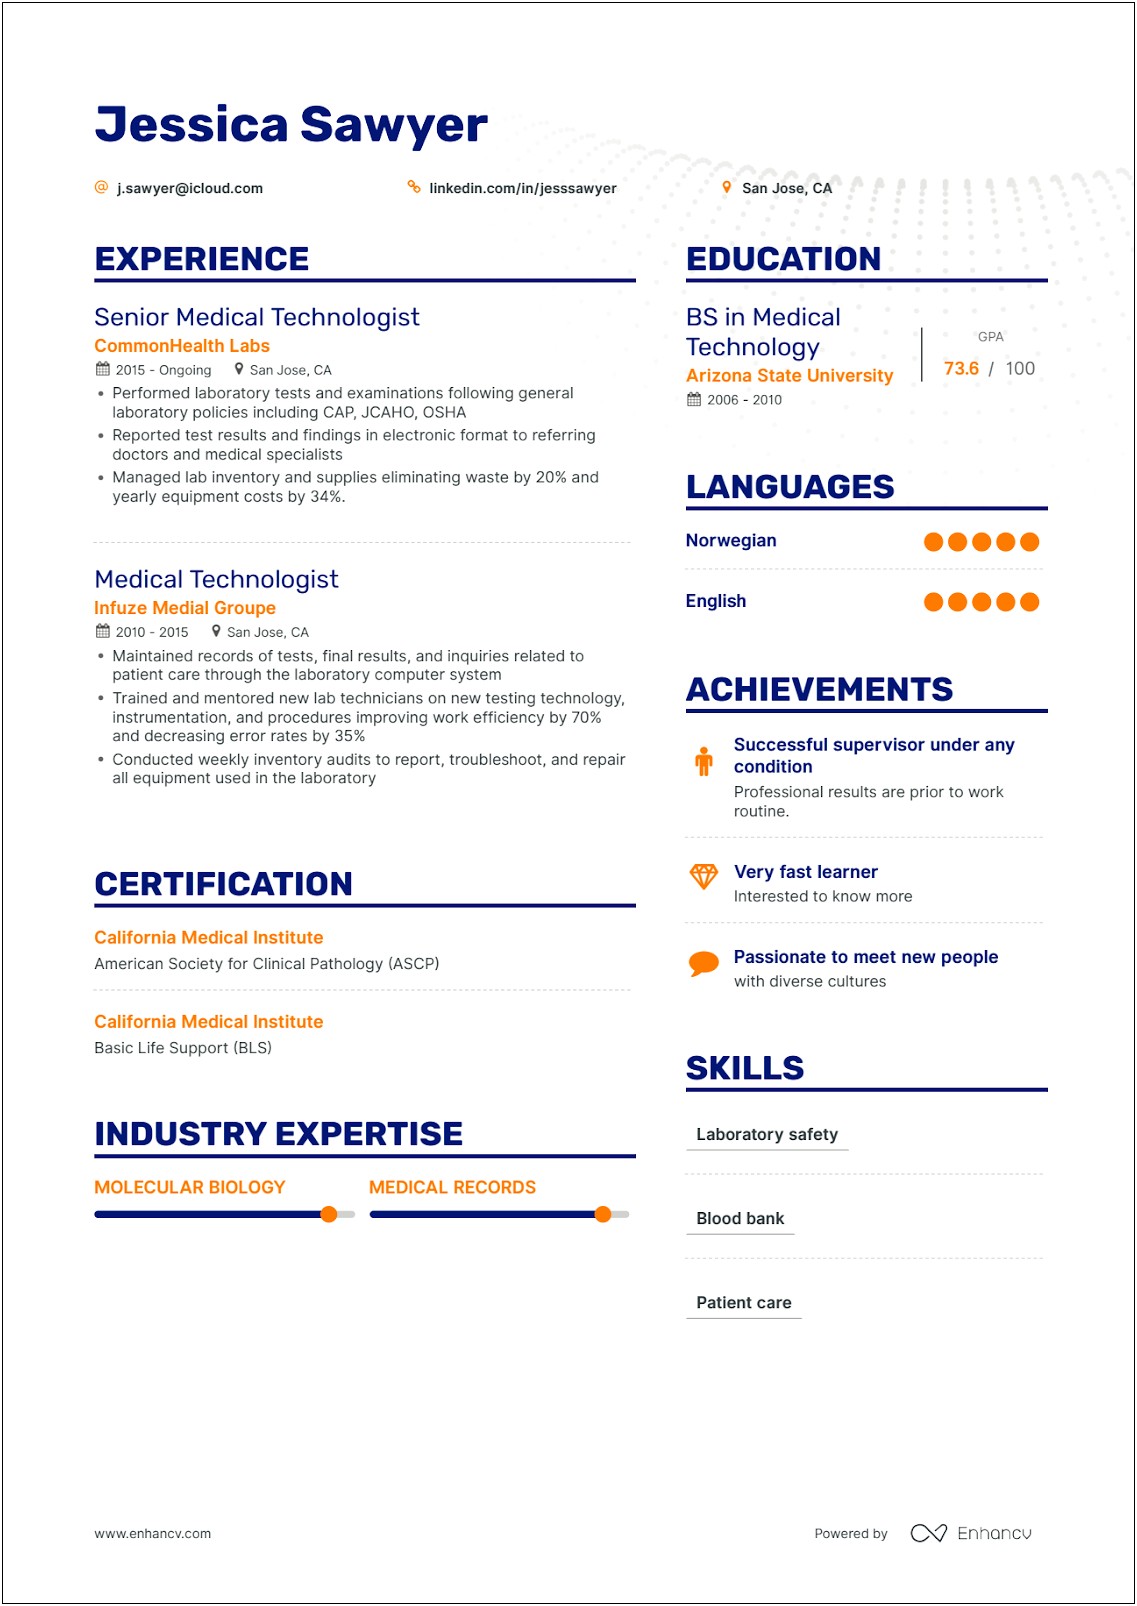 Can Certain Words Be Highlighted In A Resume